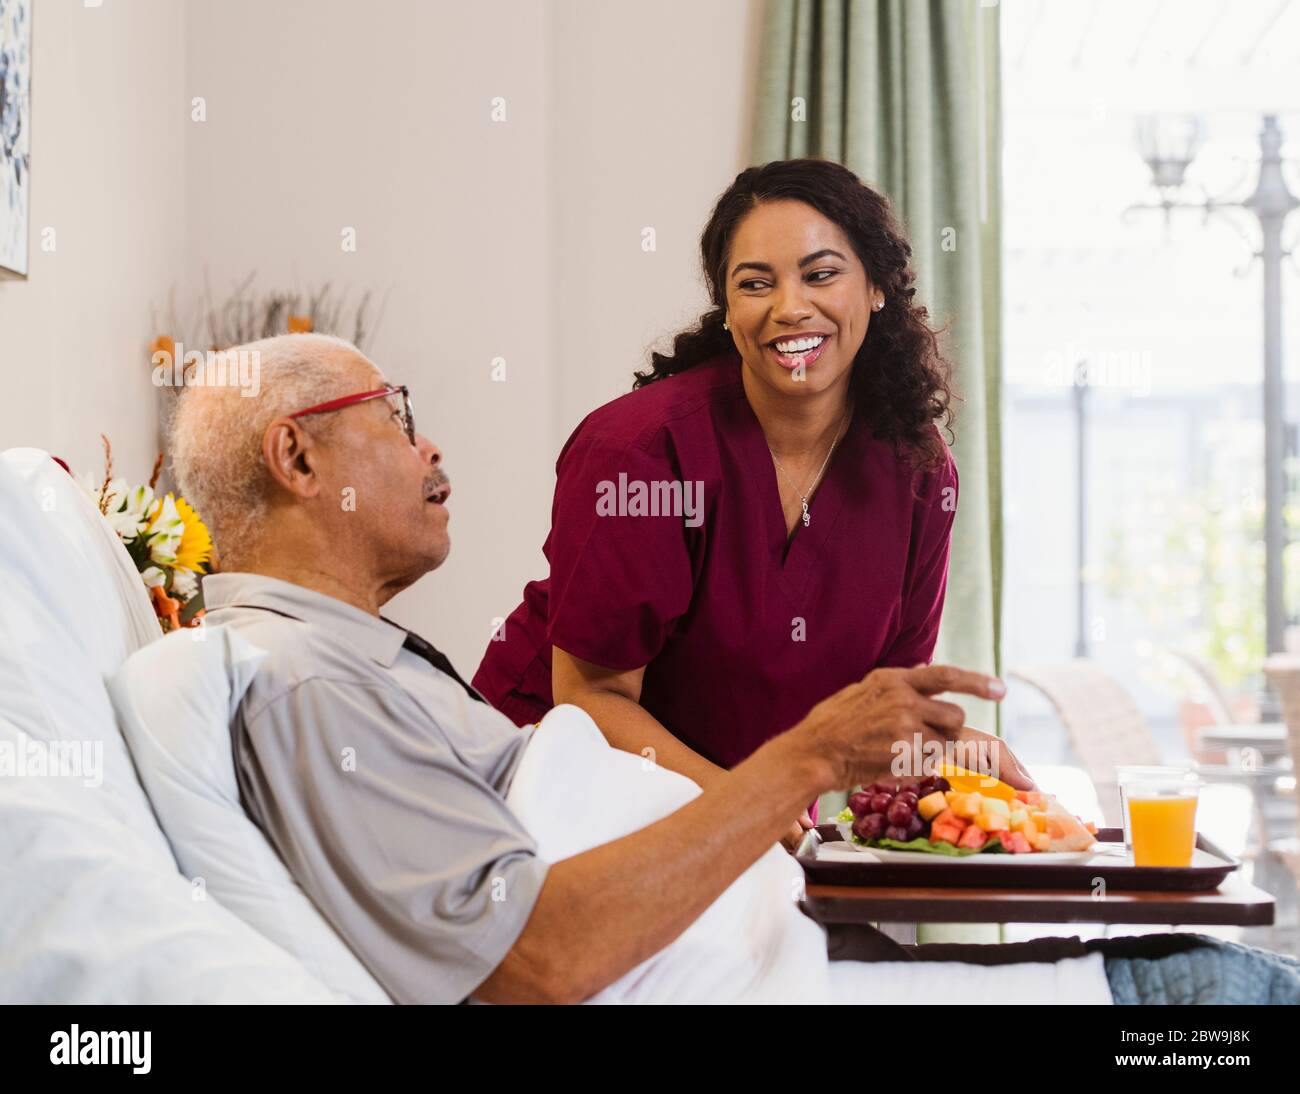 Nurse bringing healthy meal to senior man in bed Stock Photo